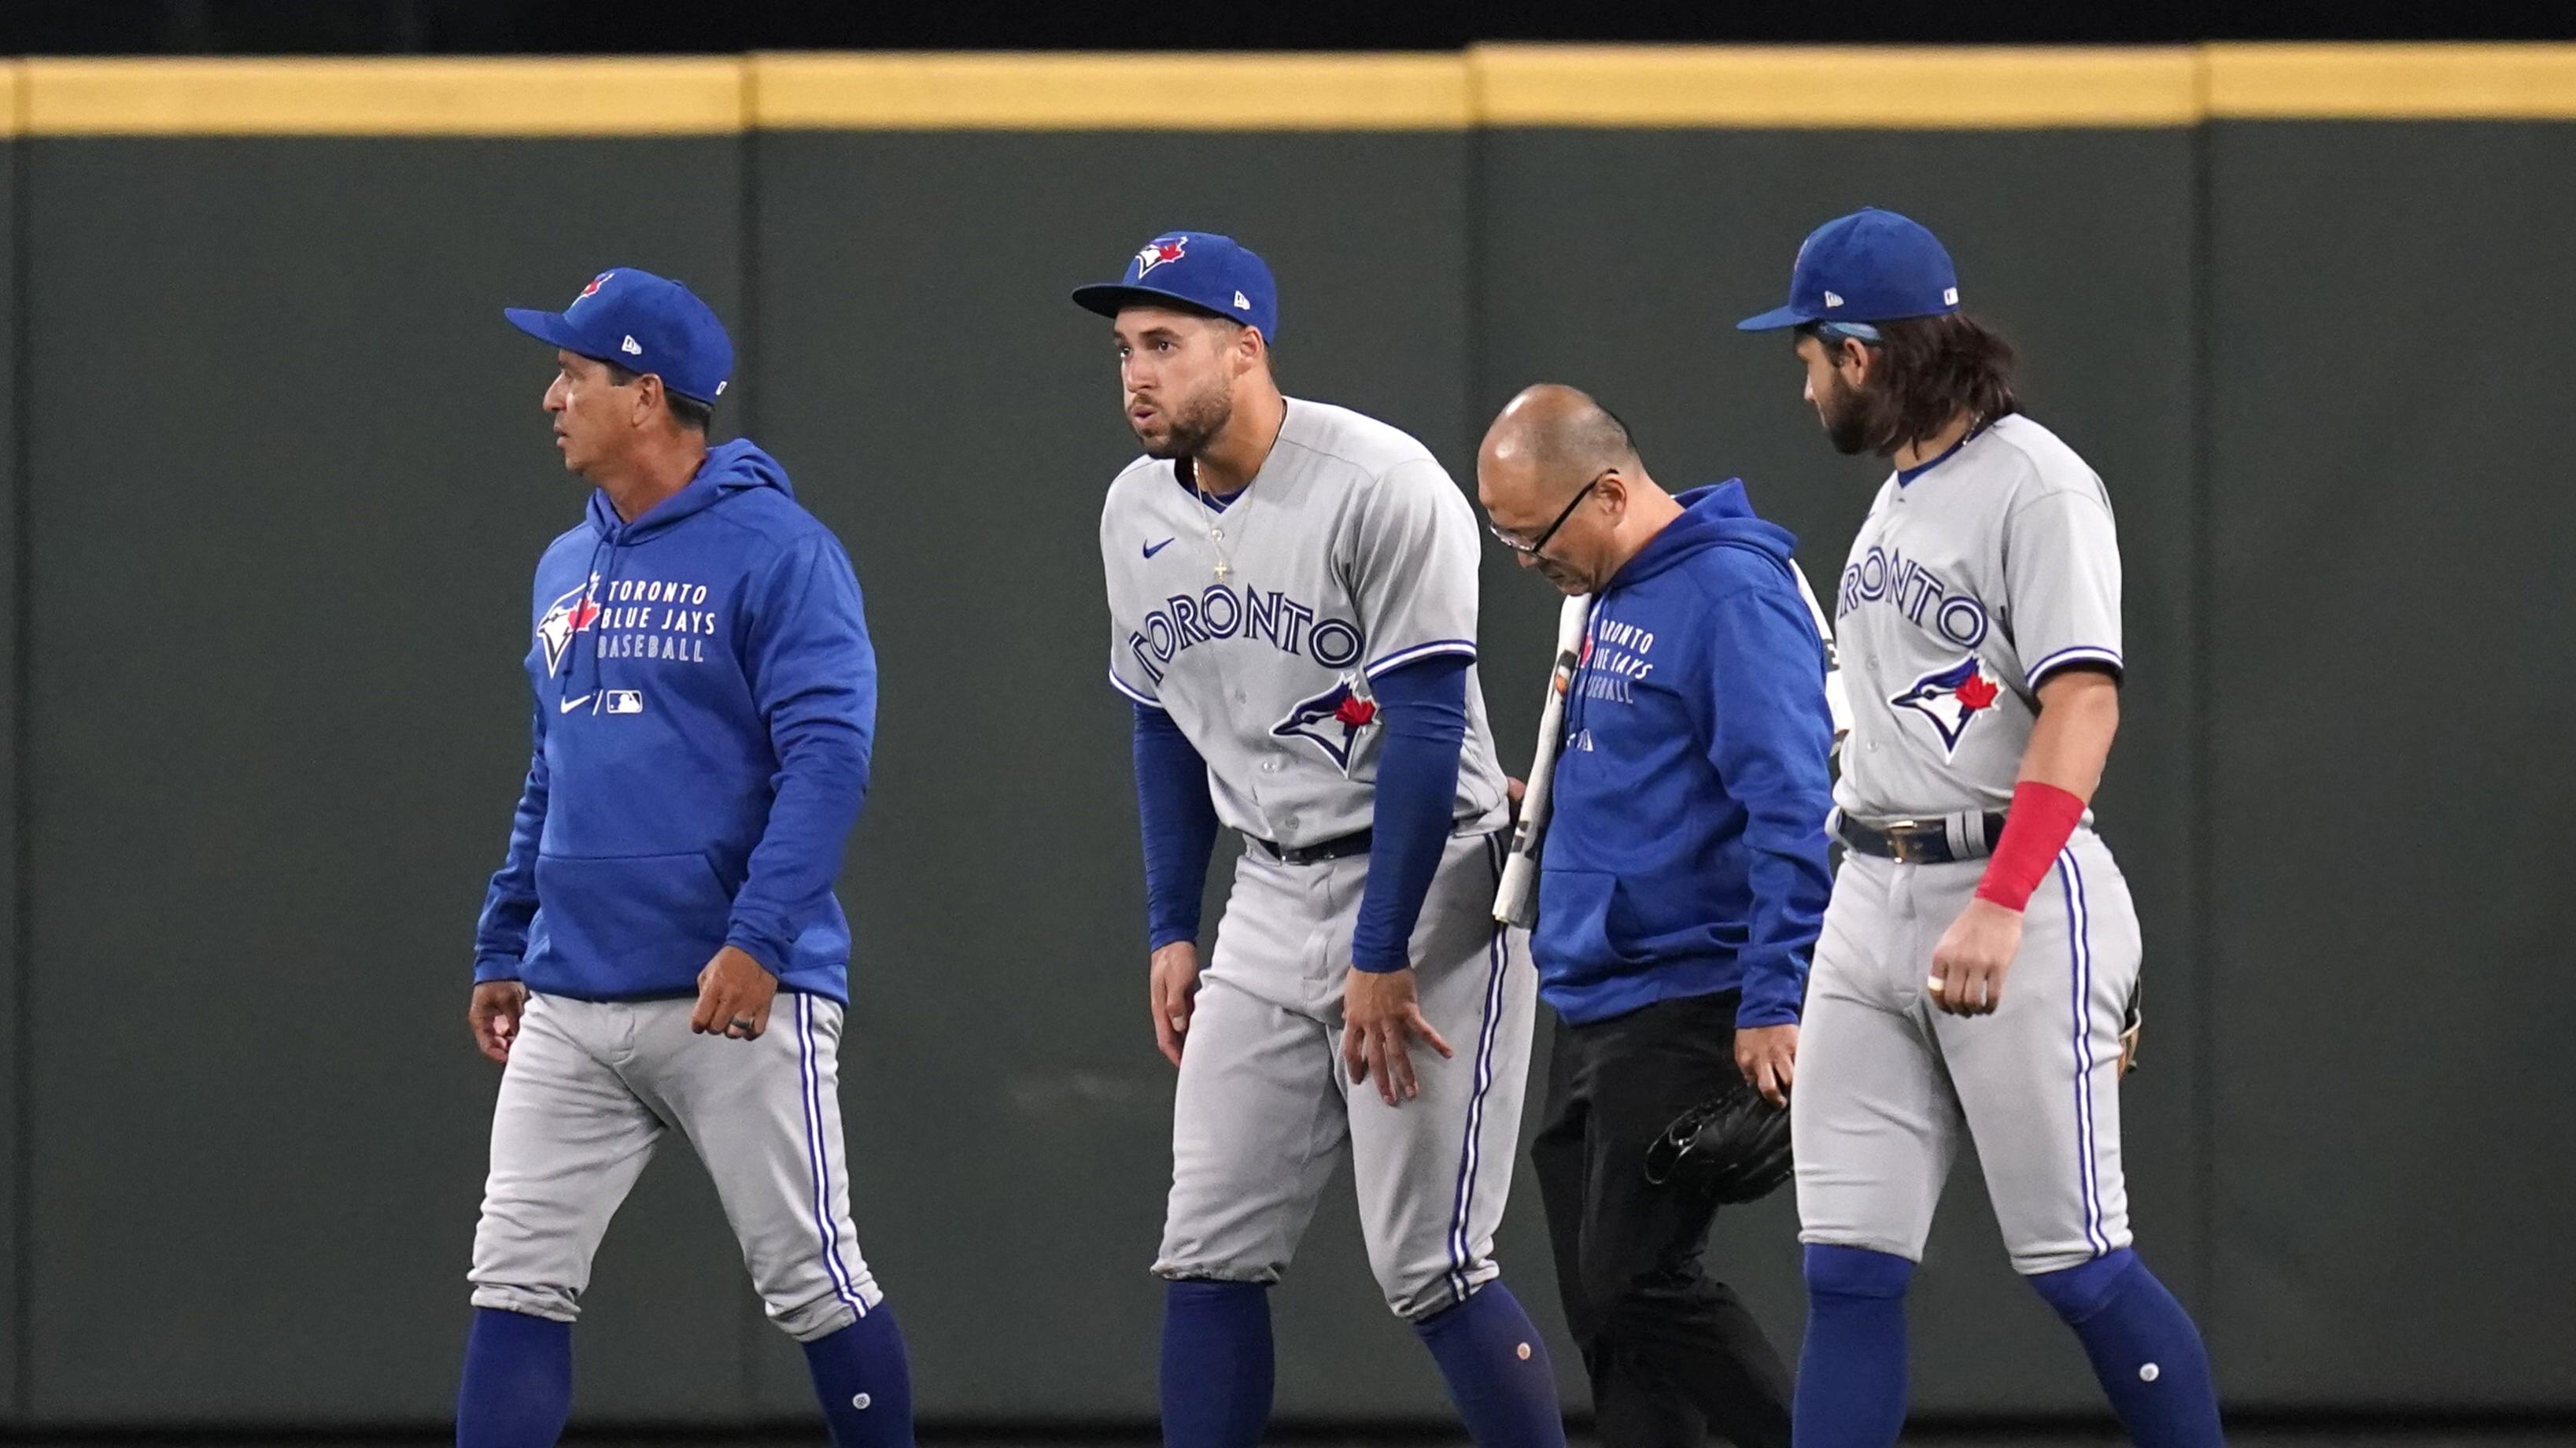 Montoyo's family-first approach shines both at home and in Blue Jays  clubhouse